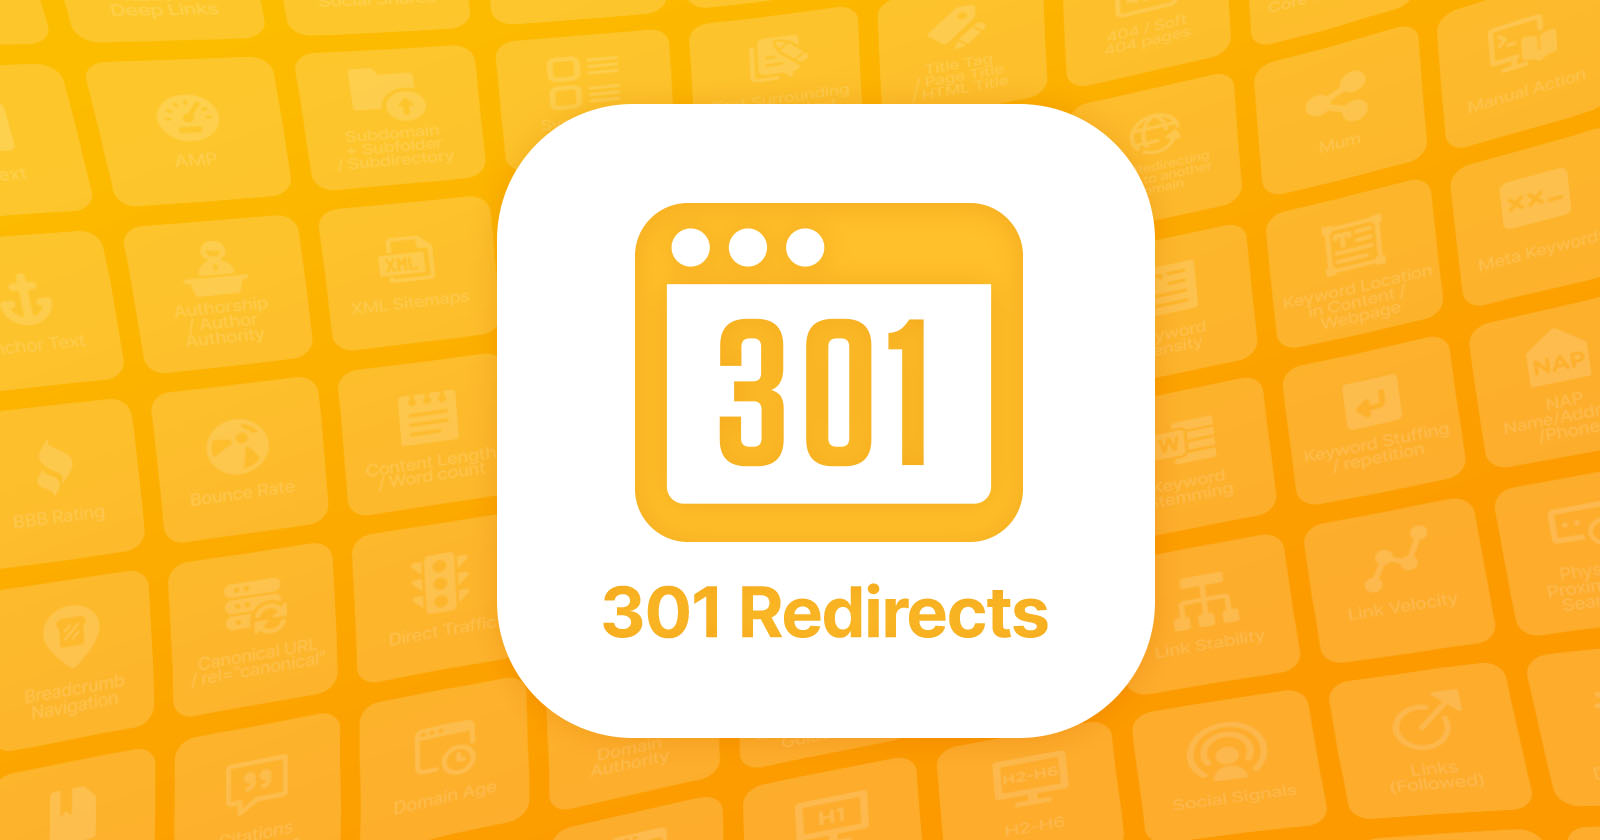 Are 301 Redirects A Google Rating Issue?